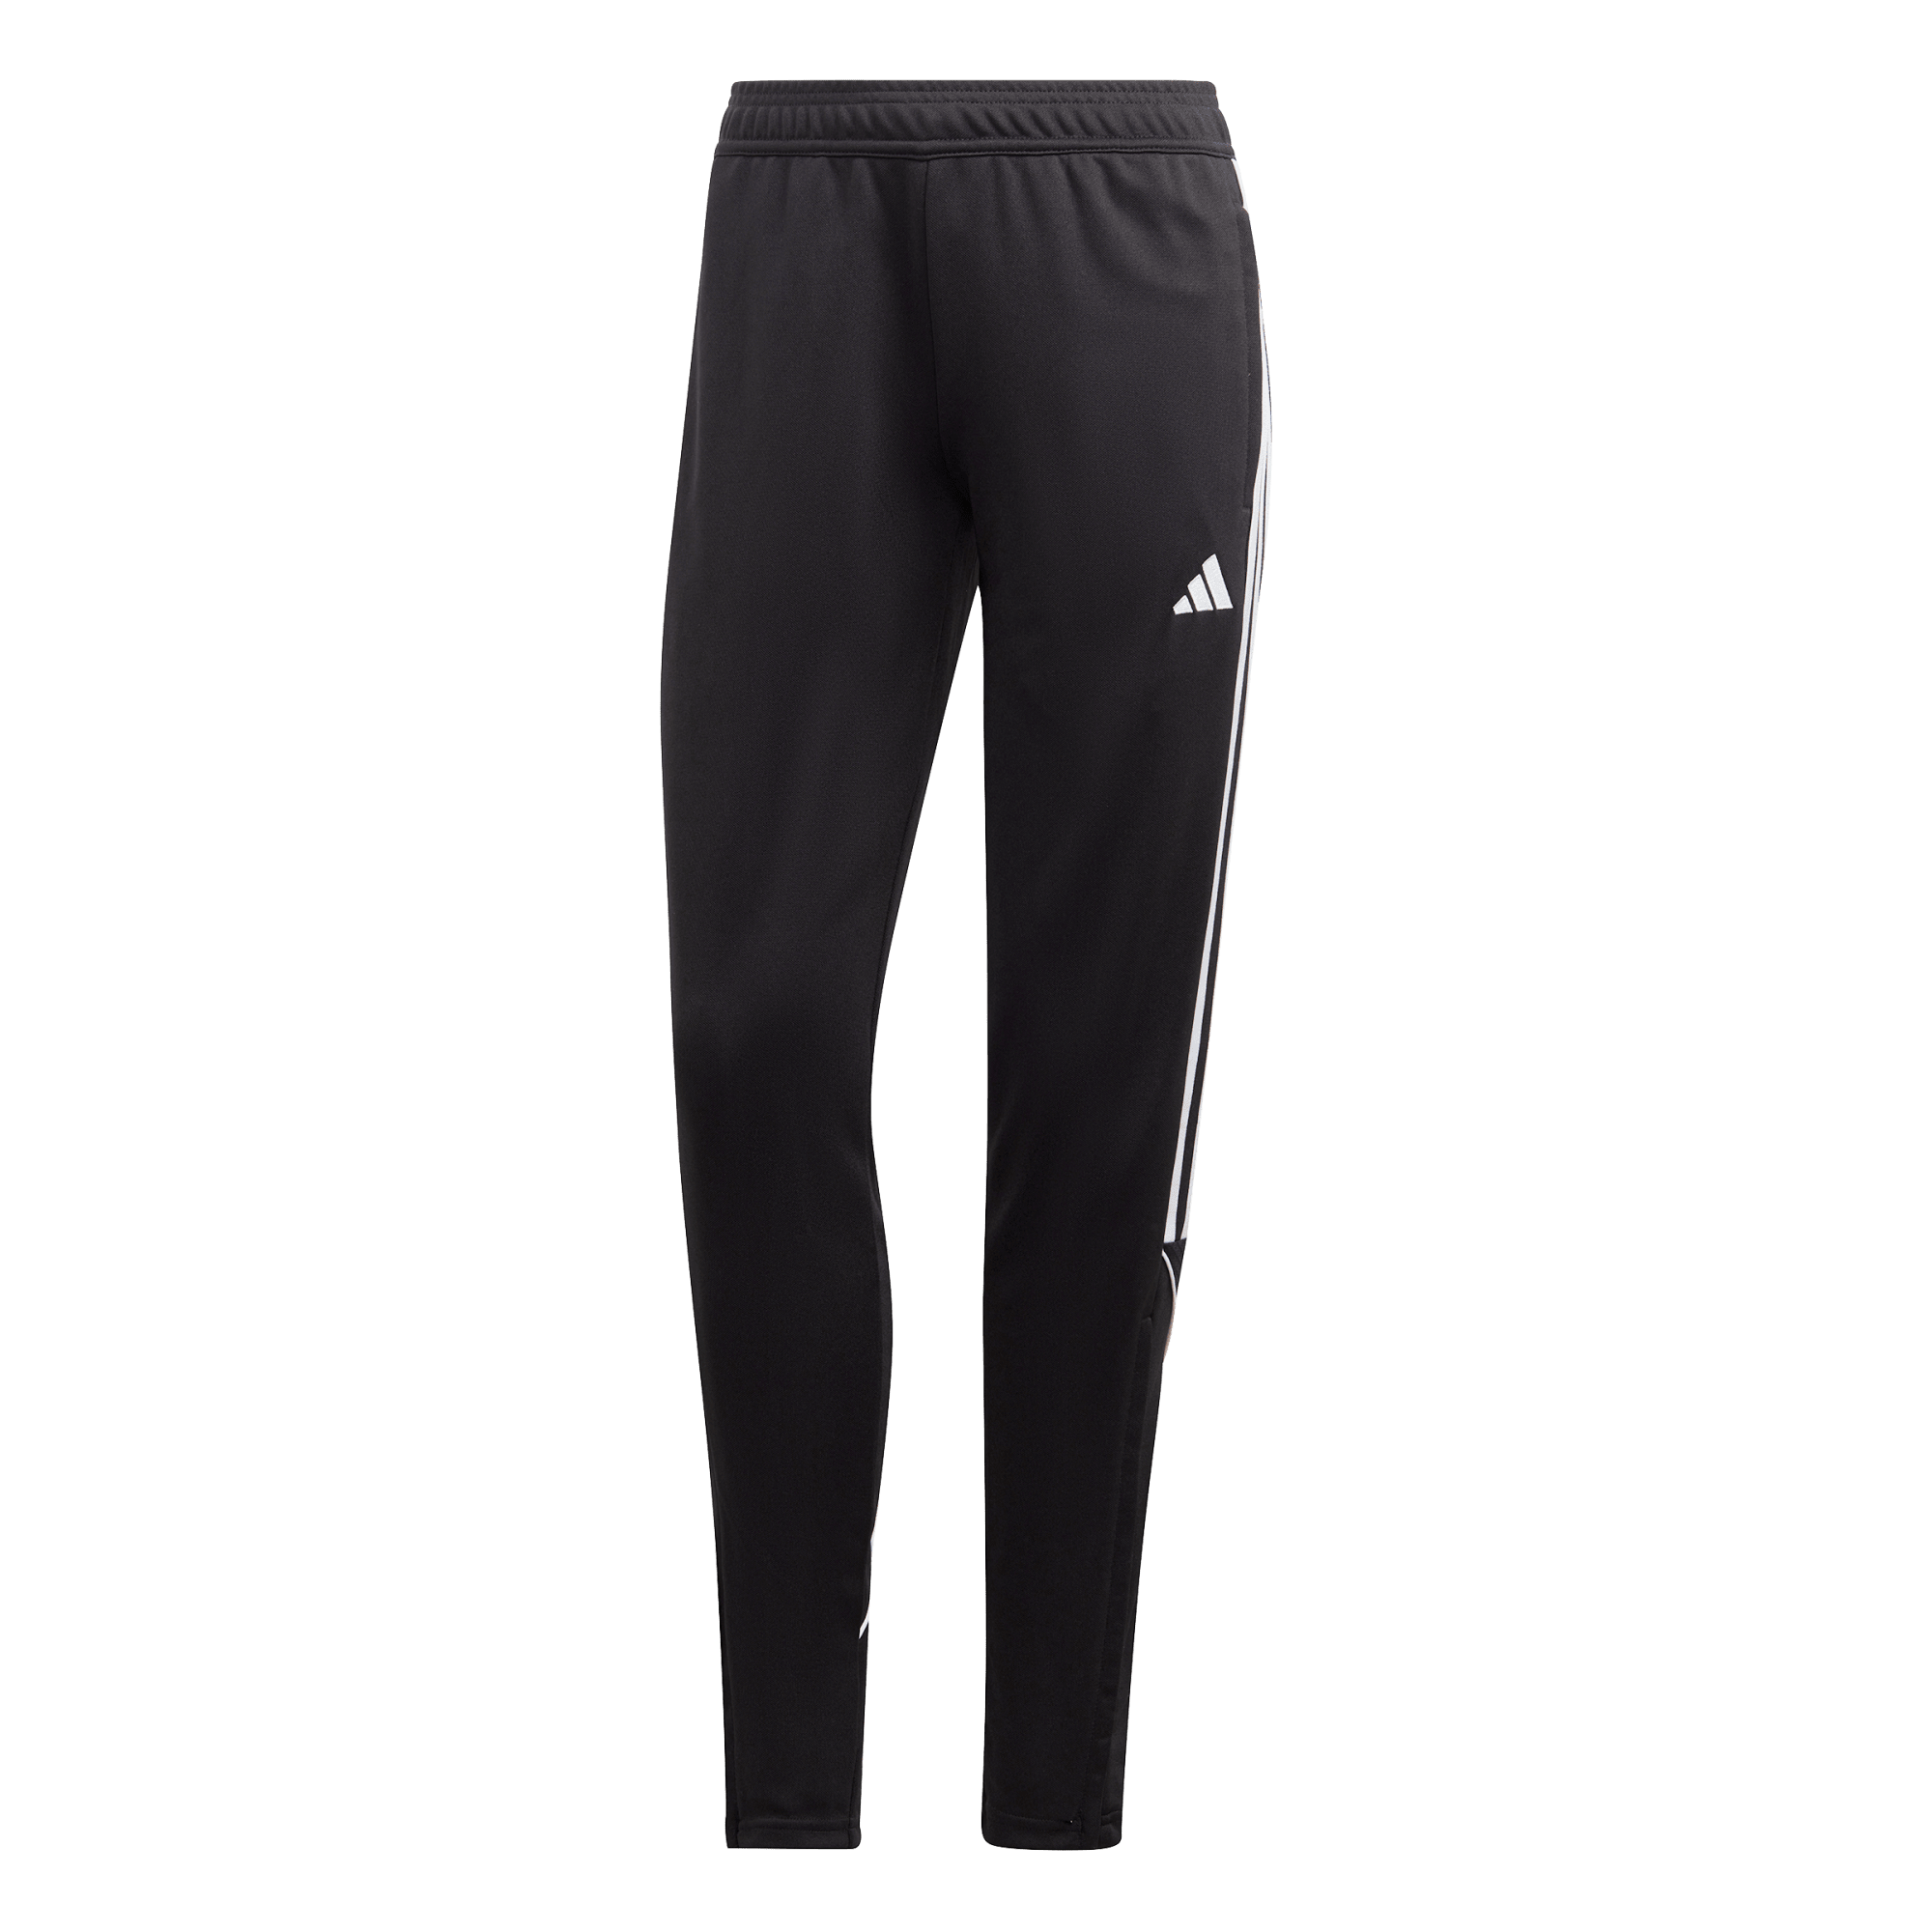 Dublin Performance Thermal Active Tight Black - Townfields Saddlers